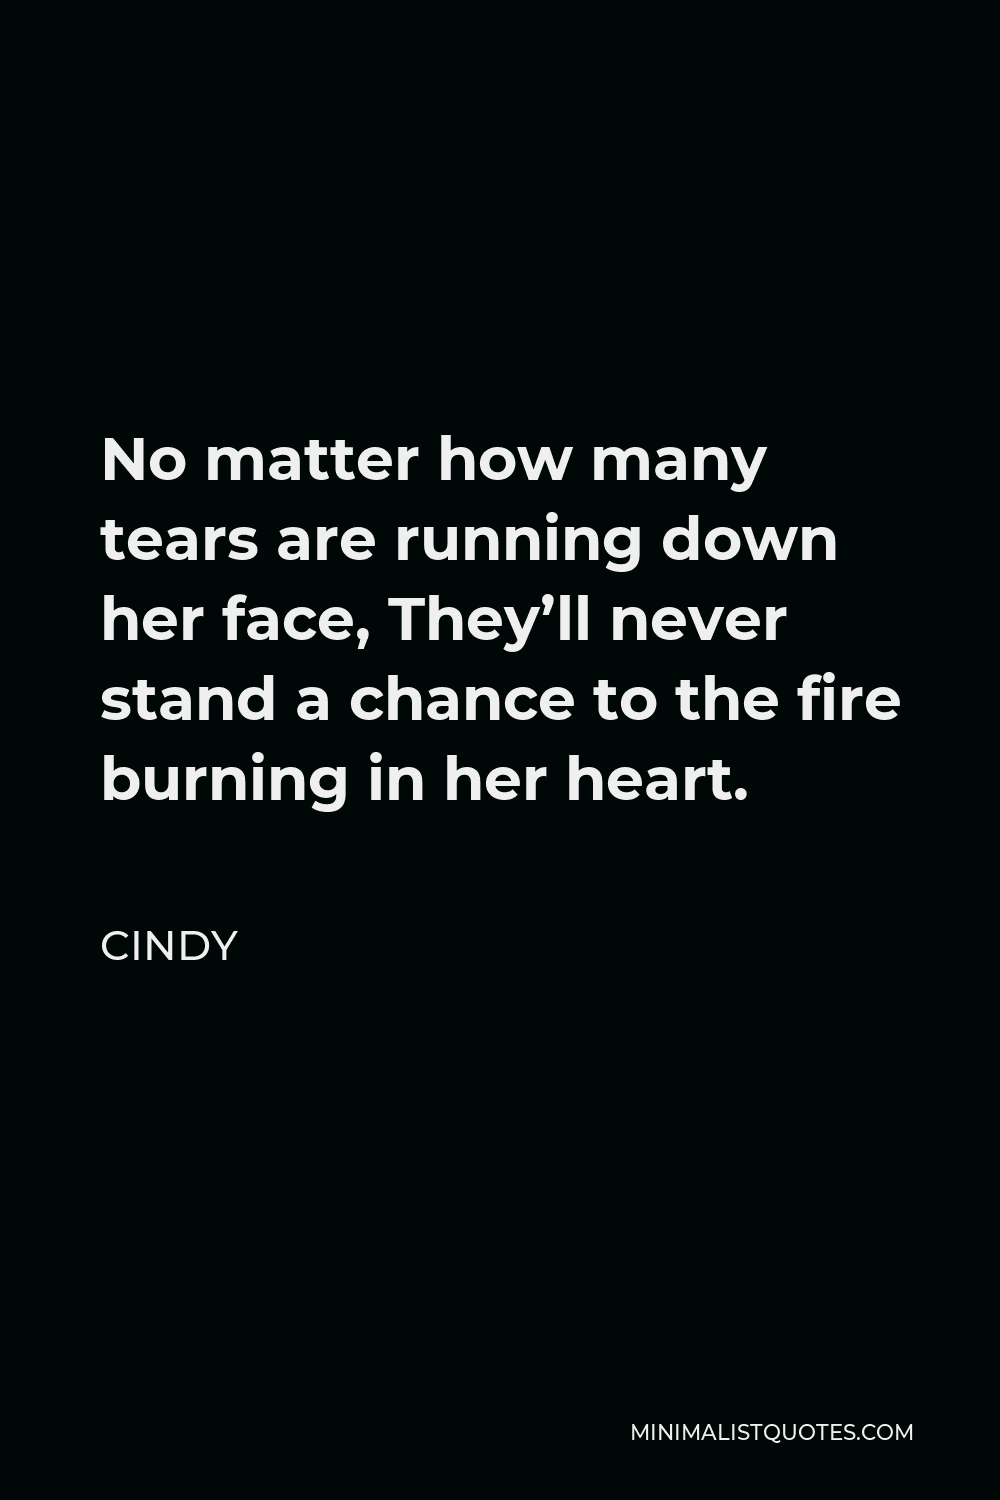 Cindy Quote - No matter how many tears are running down her face, They’ll never stand a chance to the fire burning in her heart.